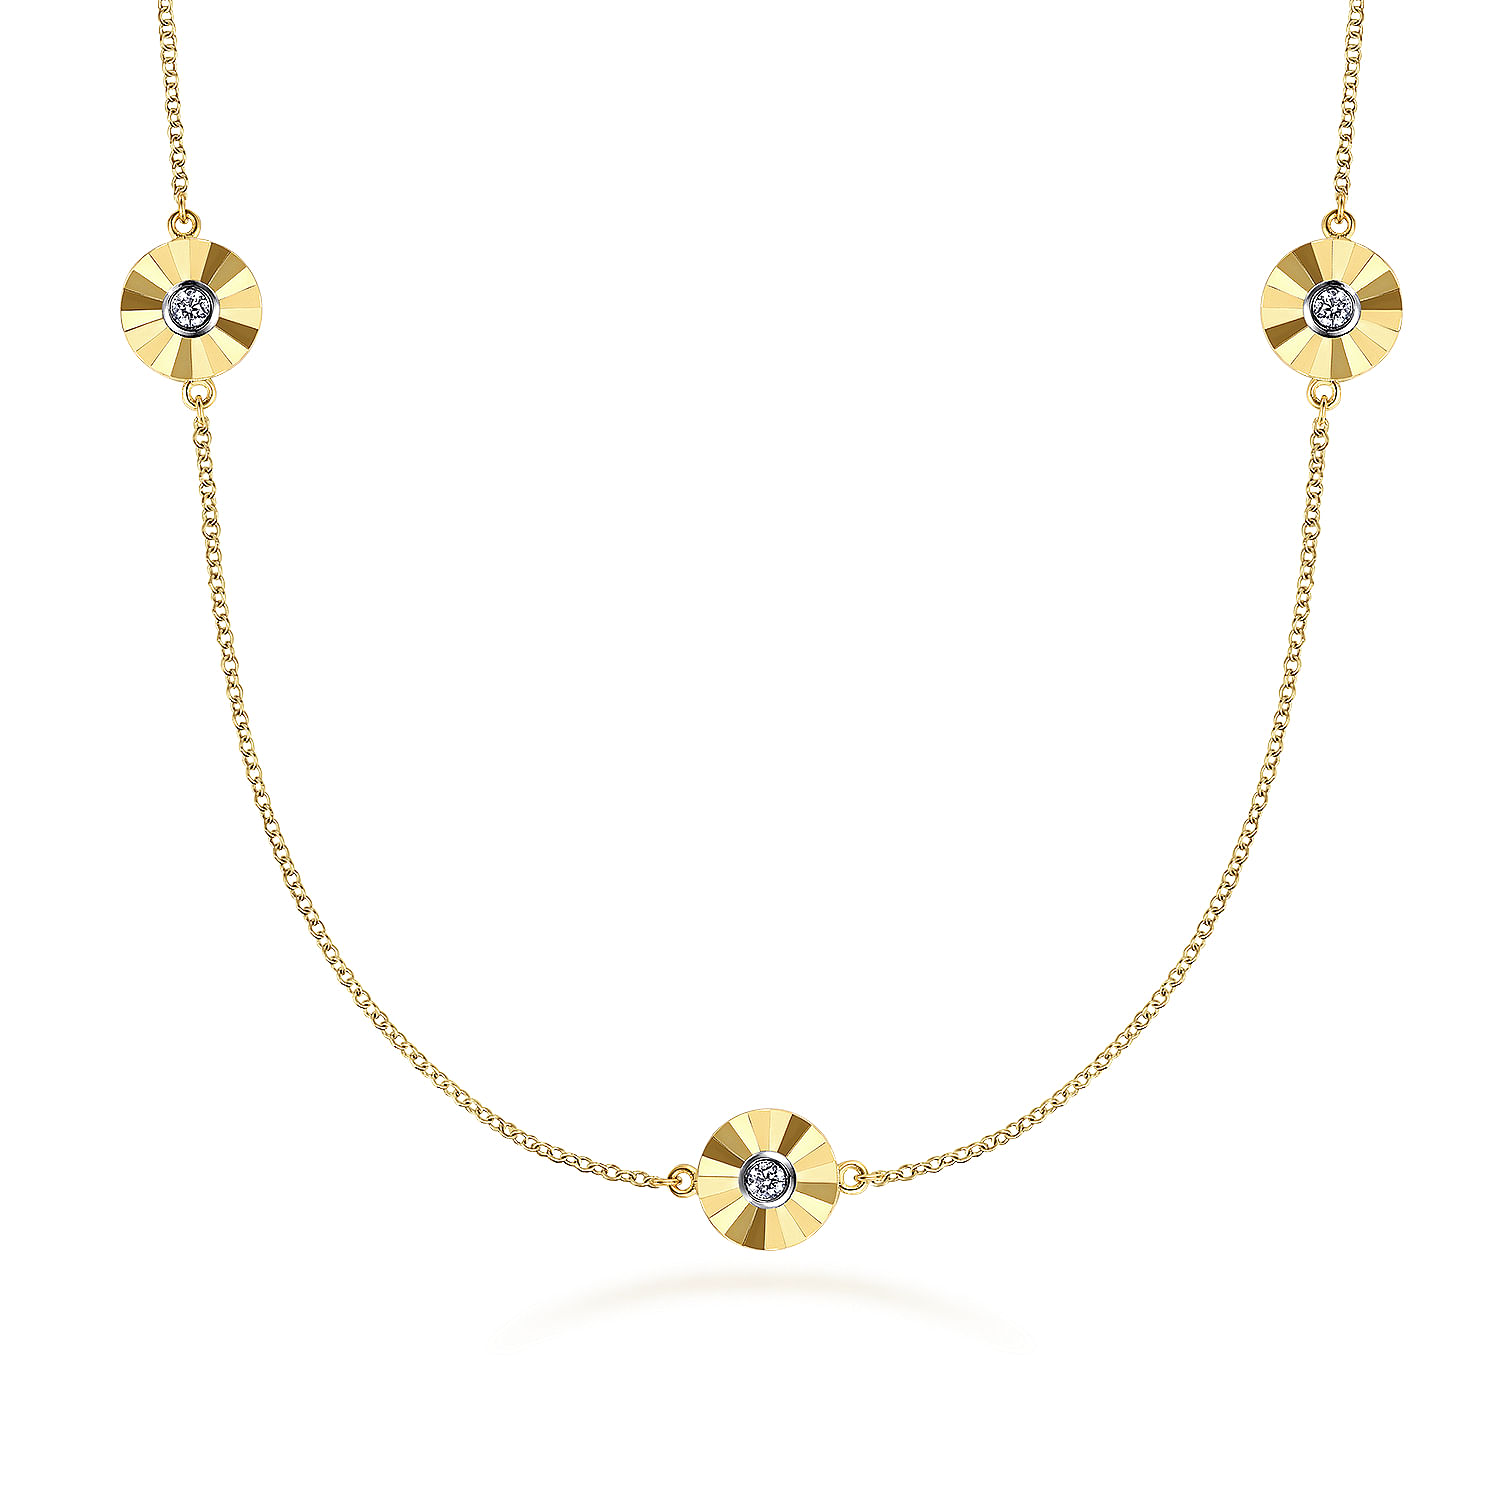 14K White and Yellow Gold Station Necklace with Diamonds 